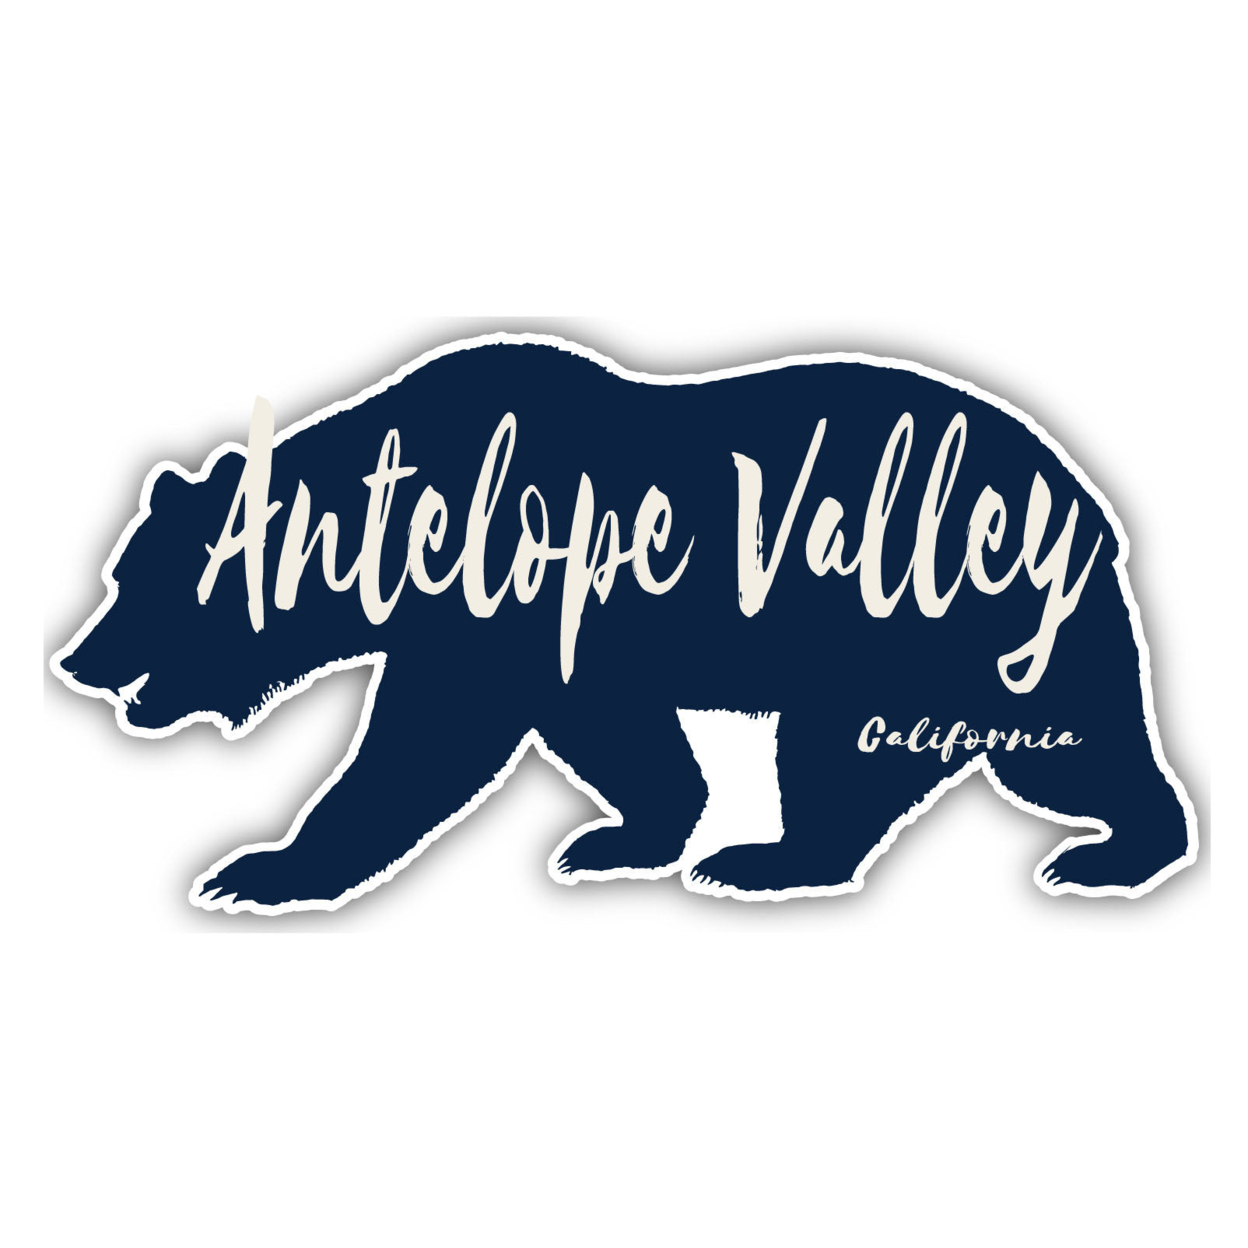 Antelope Valley California Souvenir Decorative Stickers (Choose Theme And Size) - Single Unit, 12-Inch, Tent